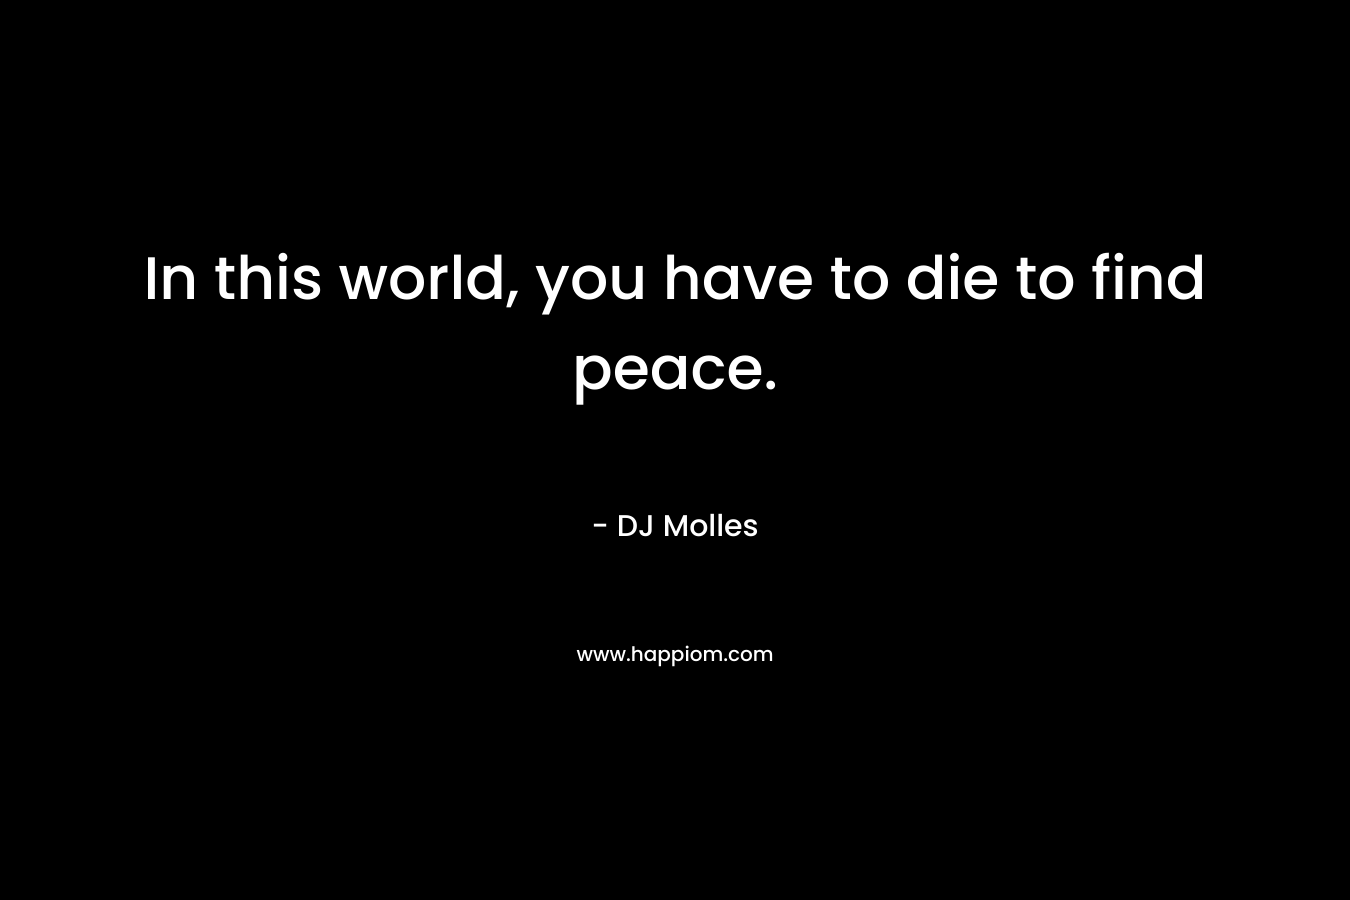 In this world, you have to die to find peace. – DJ Molles